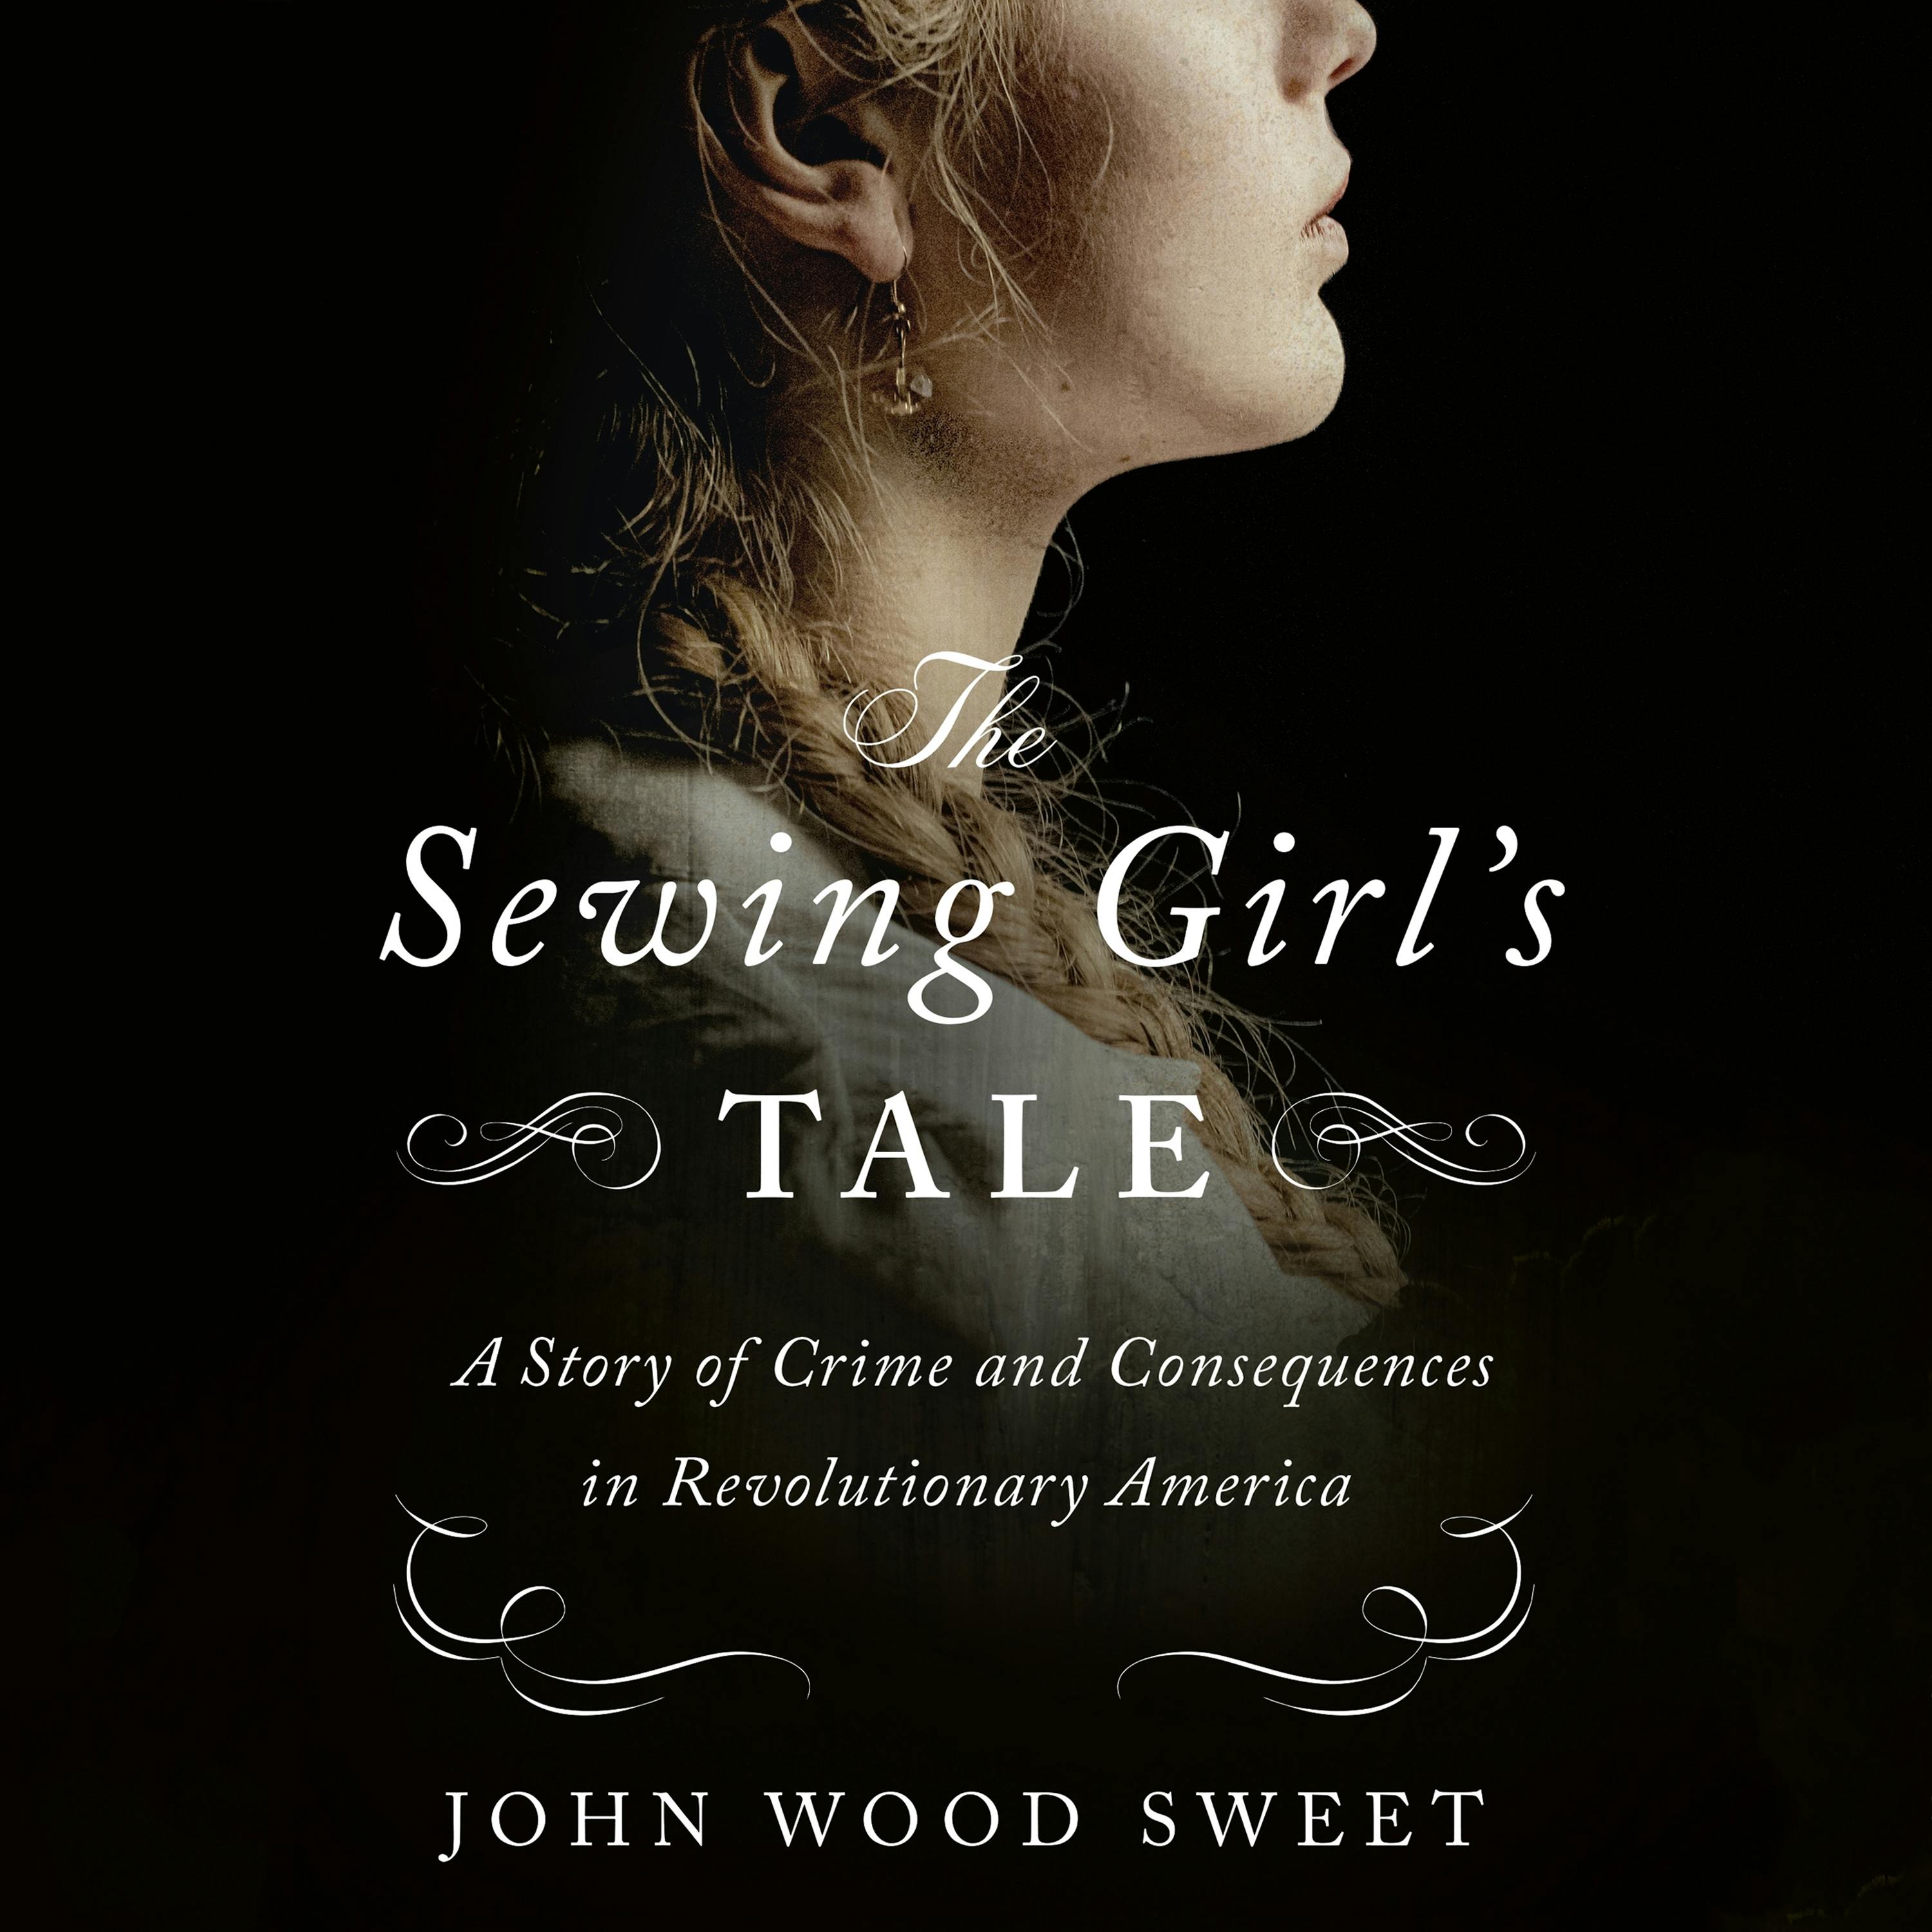 The Sewing Girls Tale